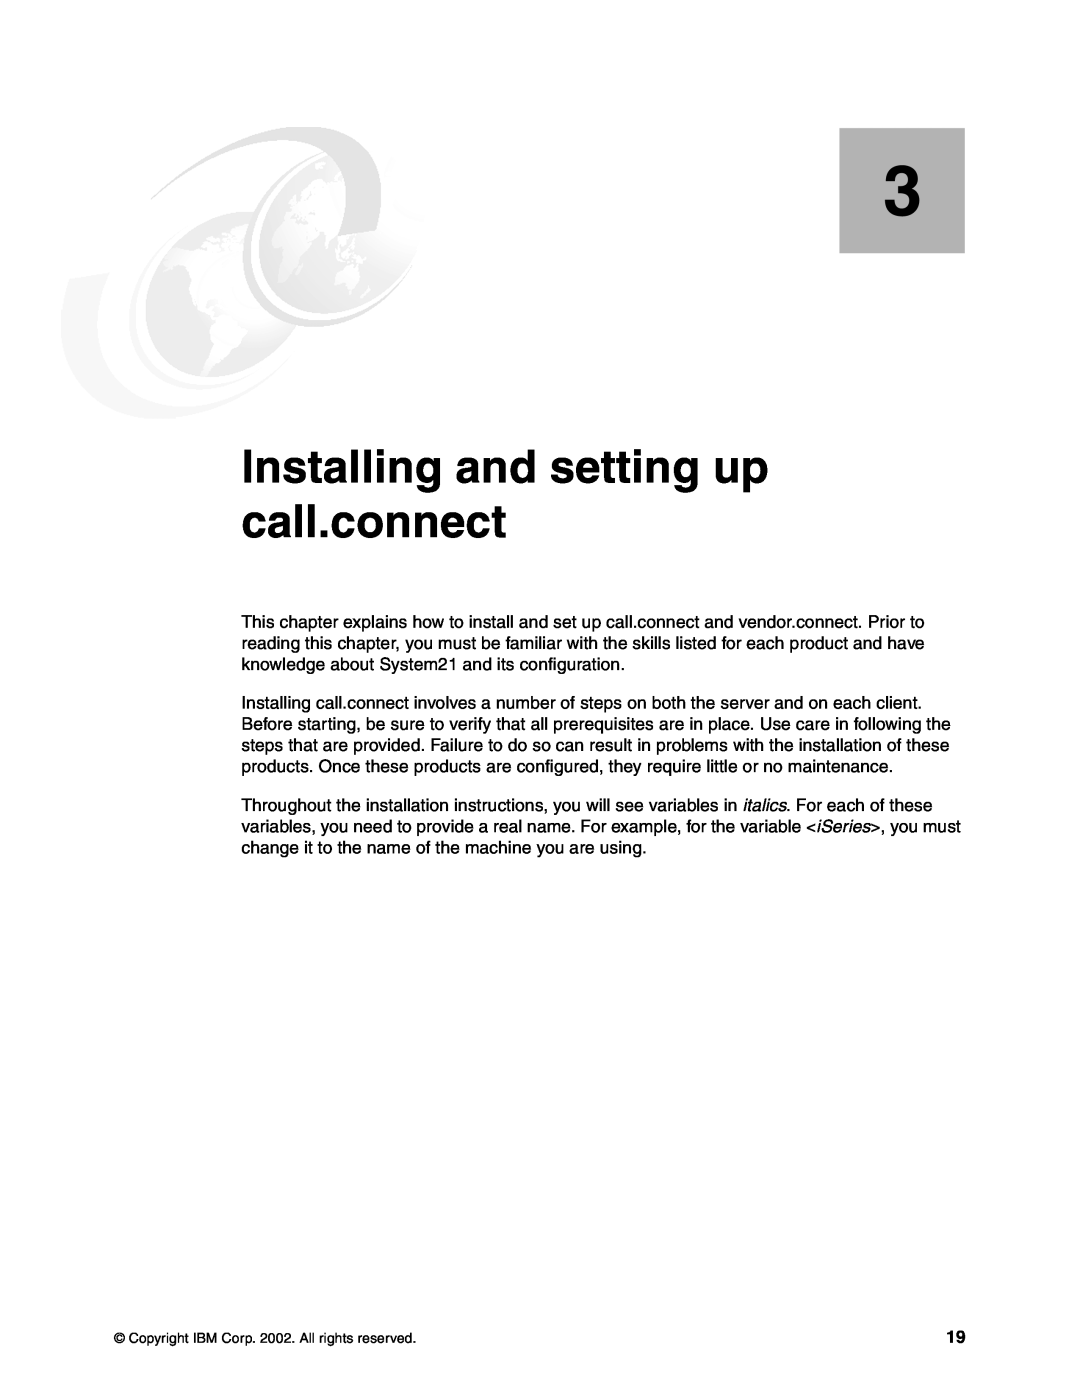 IBM SG24-6526-00 manual Installing and setting up call.connect, Copyright IBM Corp. 2002. All rights reserved 